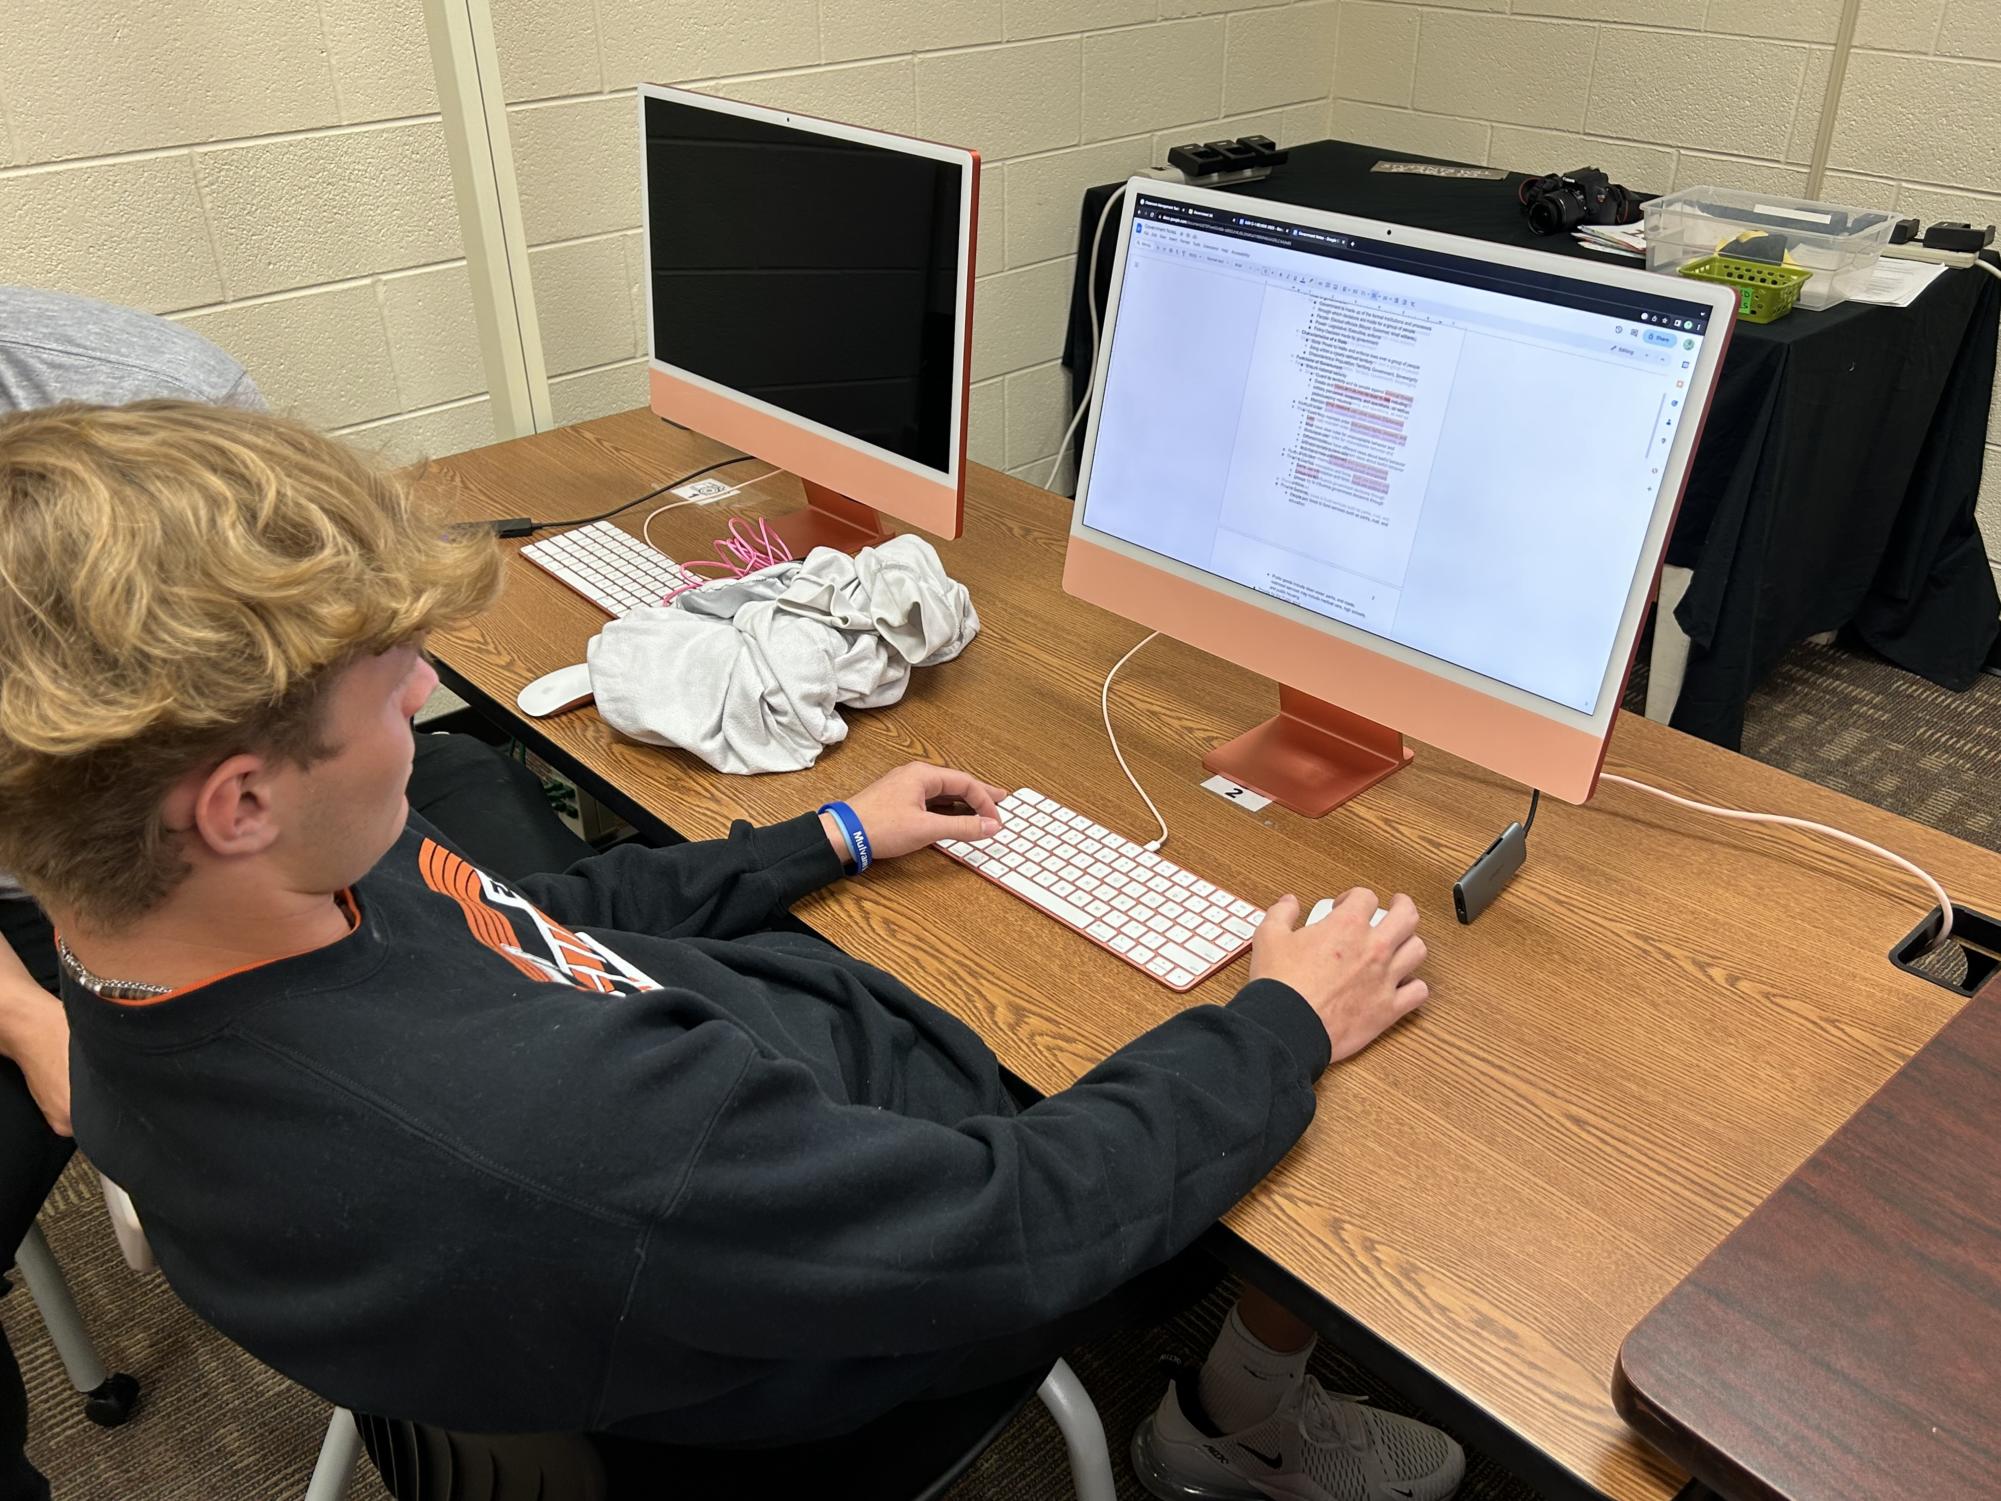 Senior Isaiah Blackwell works on the desktops in Audra Shelites classroom. Blackwell and Shelite have been working closely together to improve Blackwells photography.